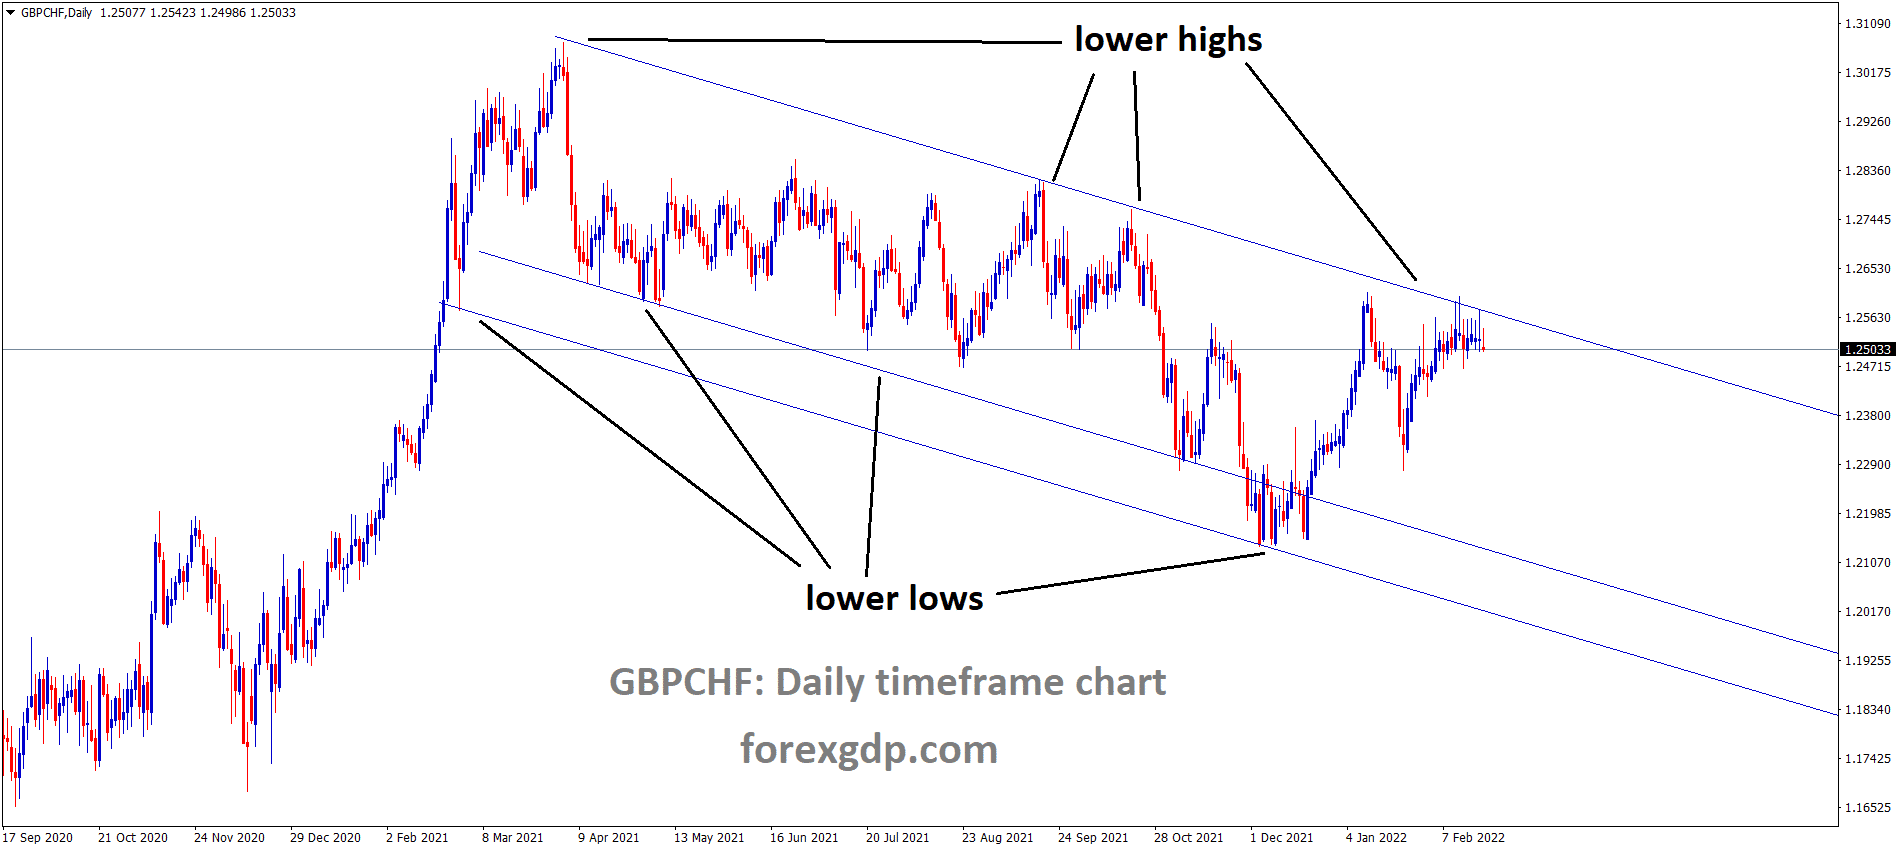 GBPCHF is moving in the Descending channel and the market has consolidated at the lower high area of the channel.